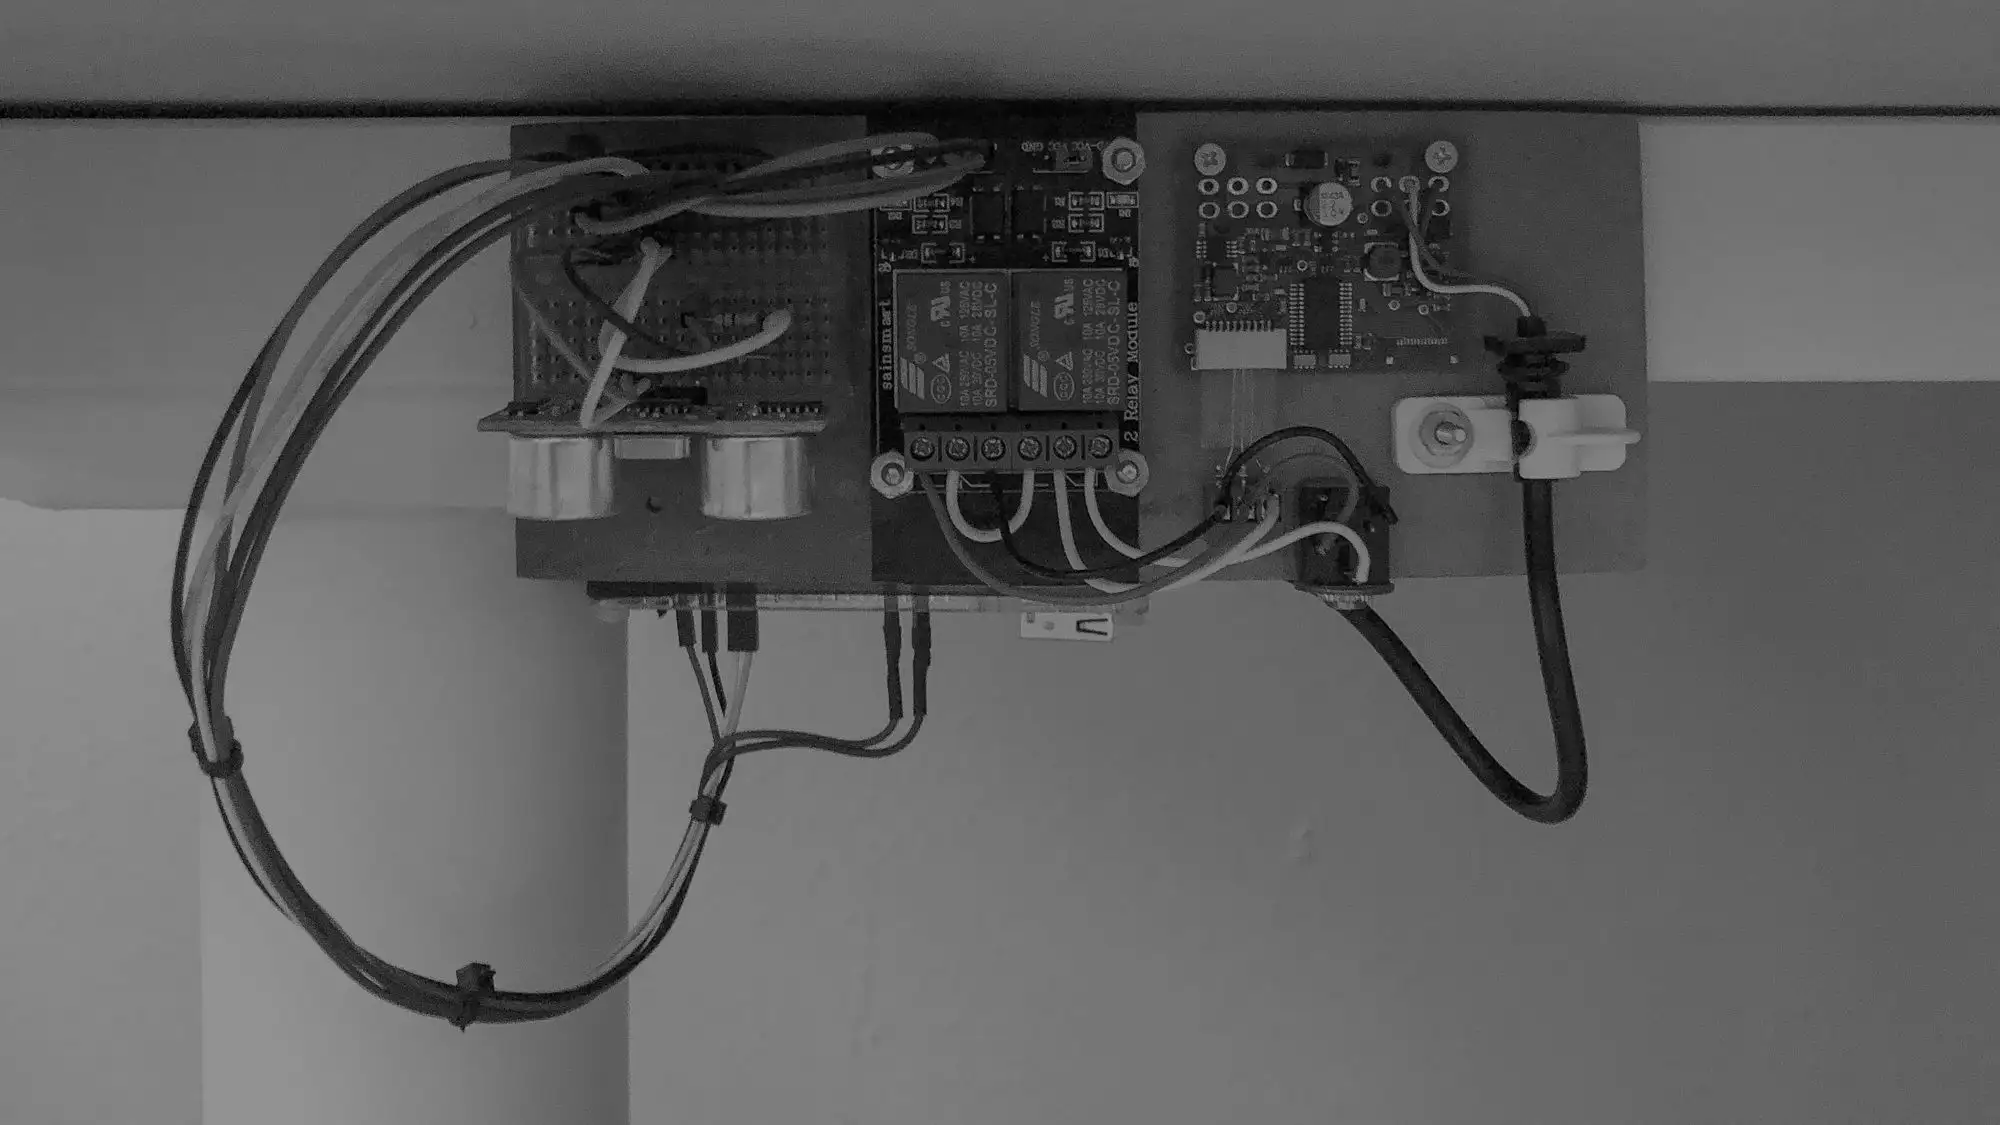 Hacking Ikea's sit-stand desk with a Raspberry Pi to support realtime height feedback and programmatic control.